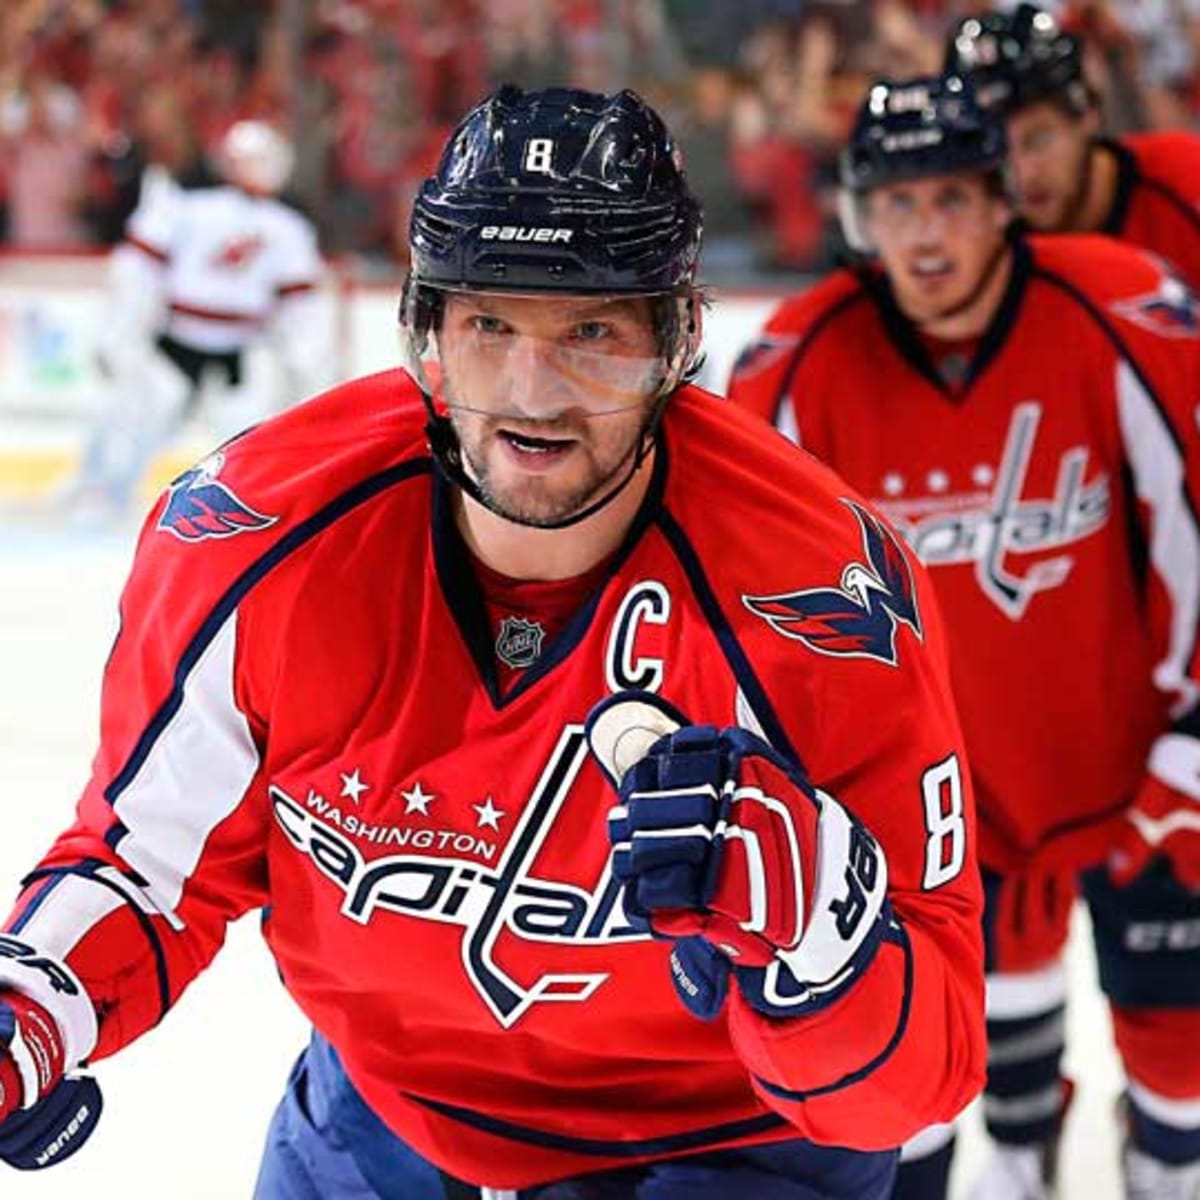 Alex Ovechkin tells Capitals it's time to bring his first year